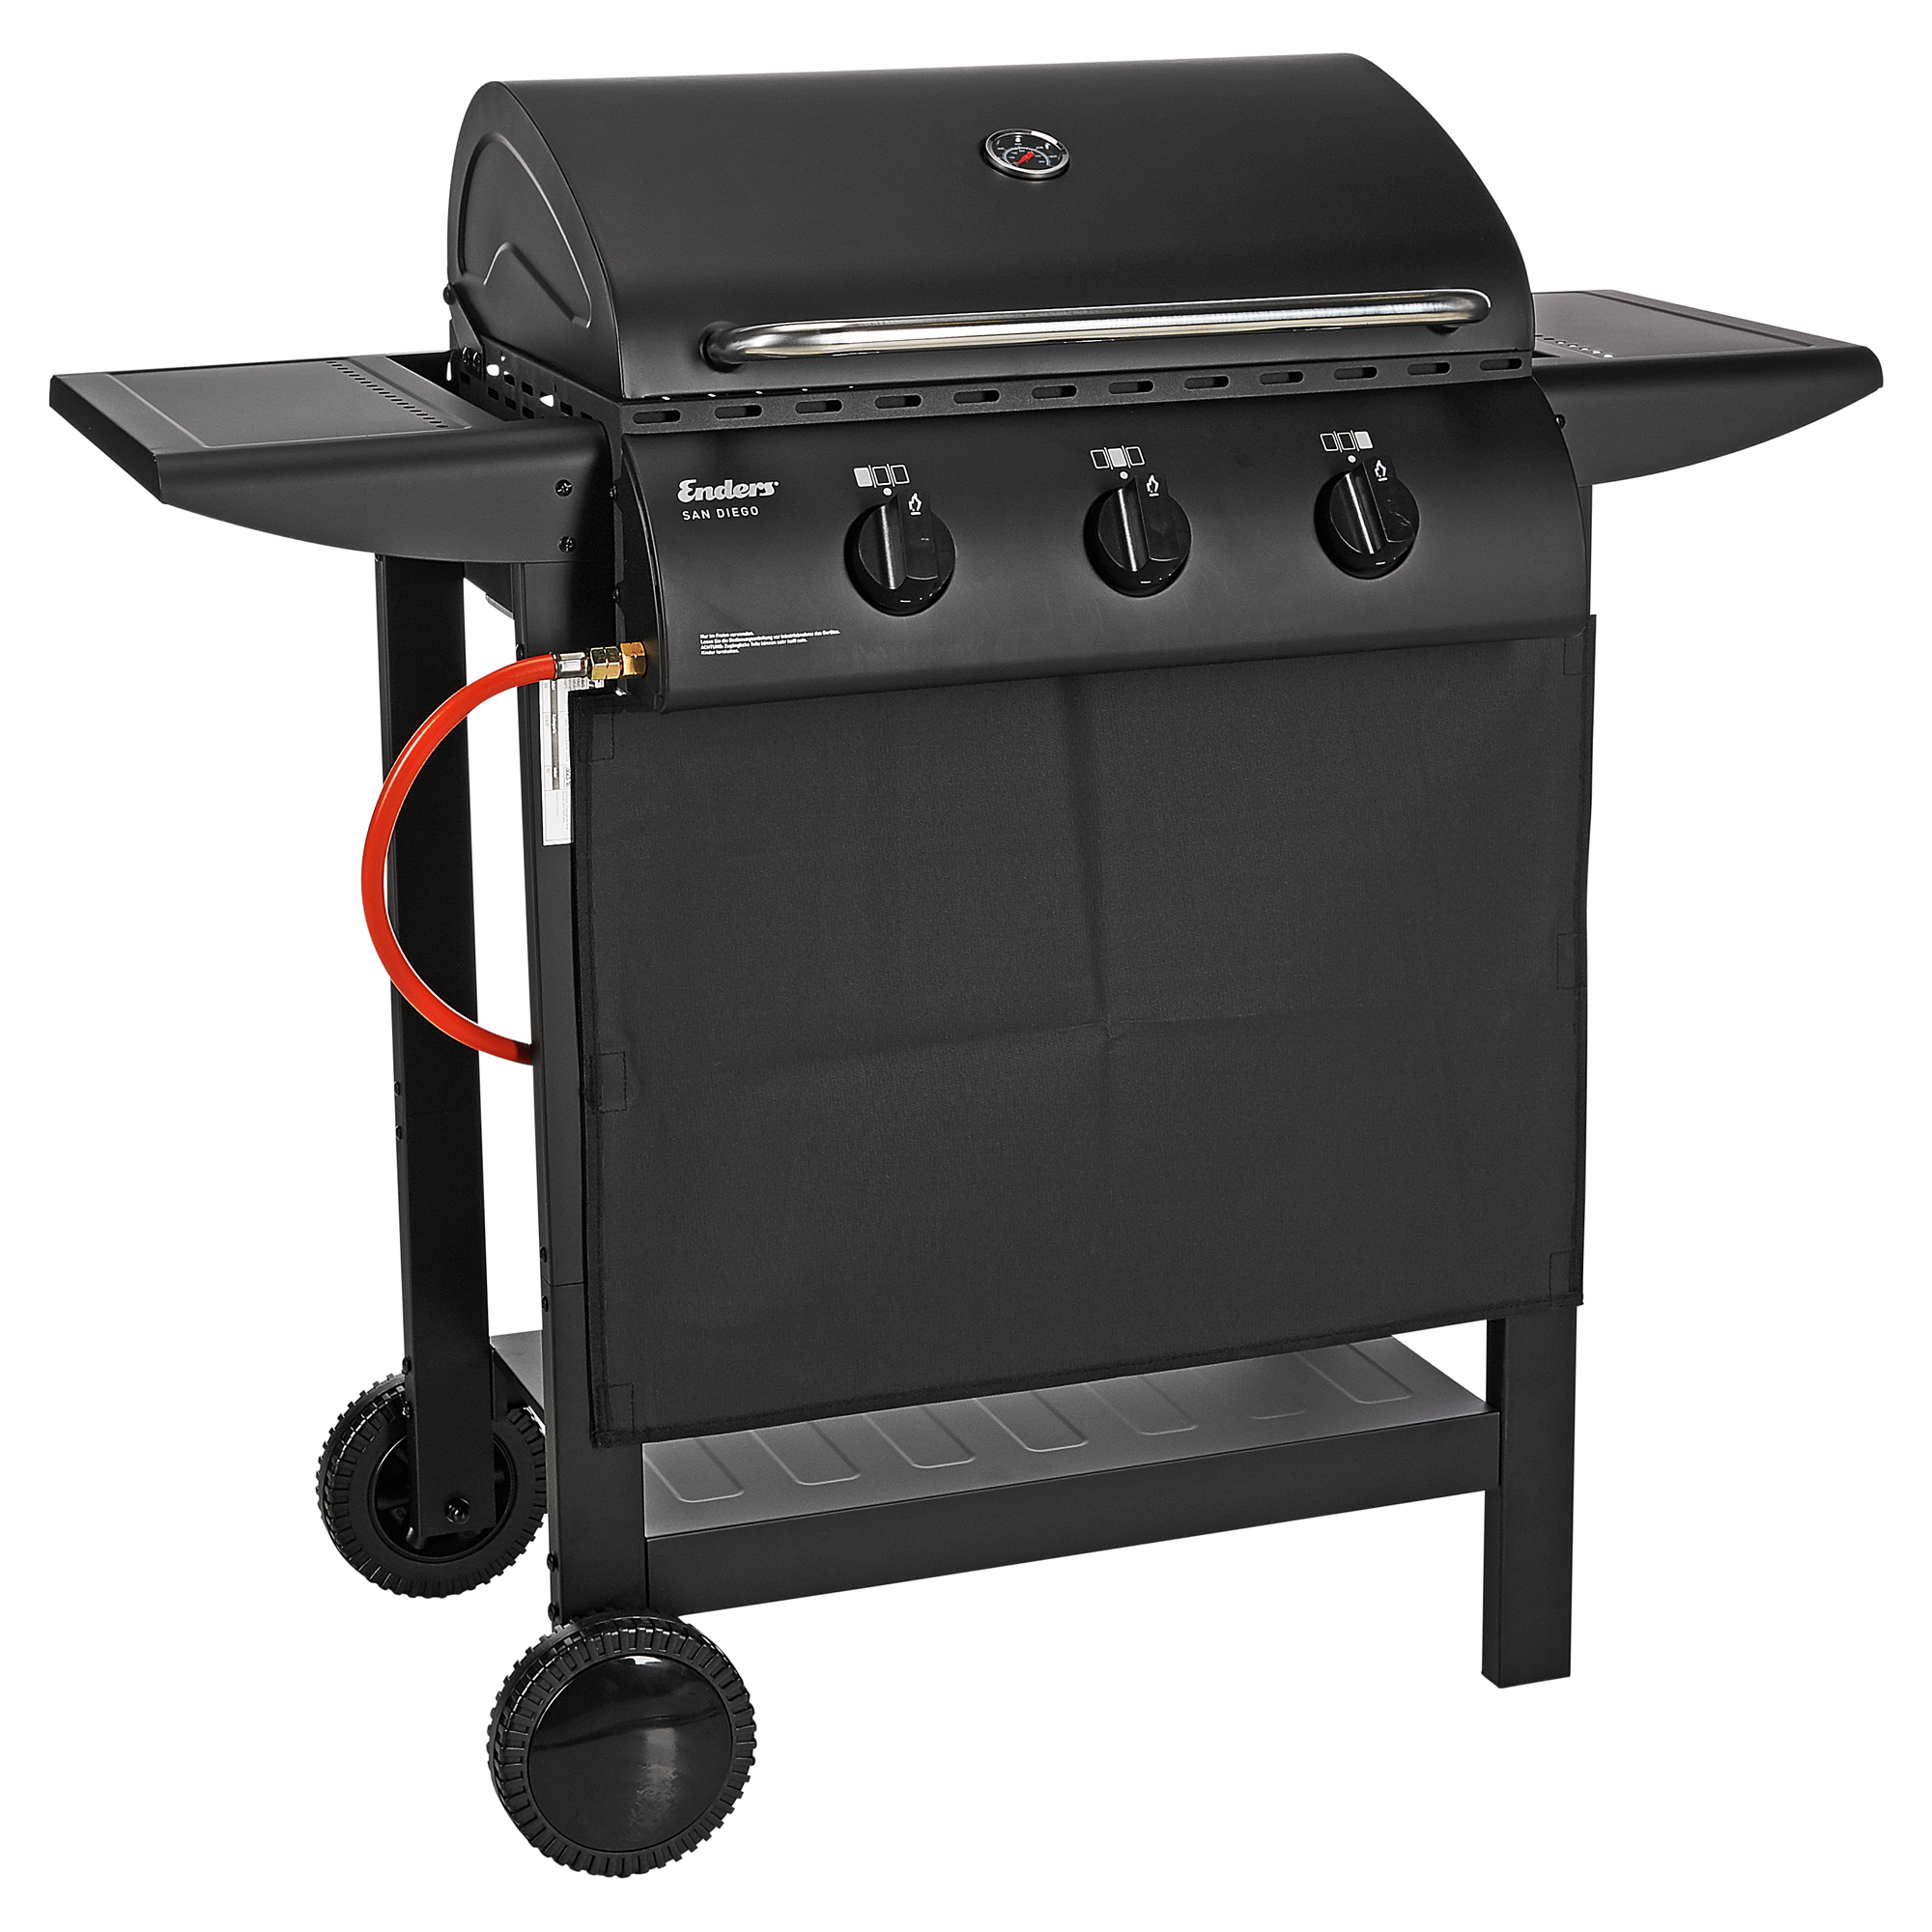 Gasgrill 'San Diego 3' Metall schwarz 50,5 x 33 cm + product picture